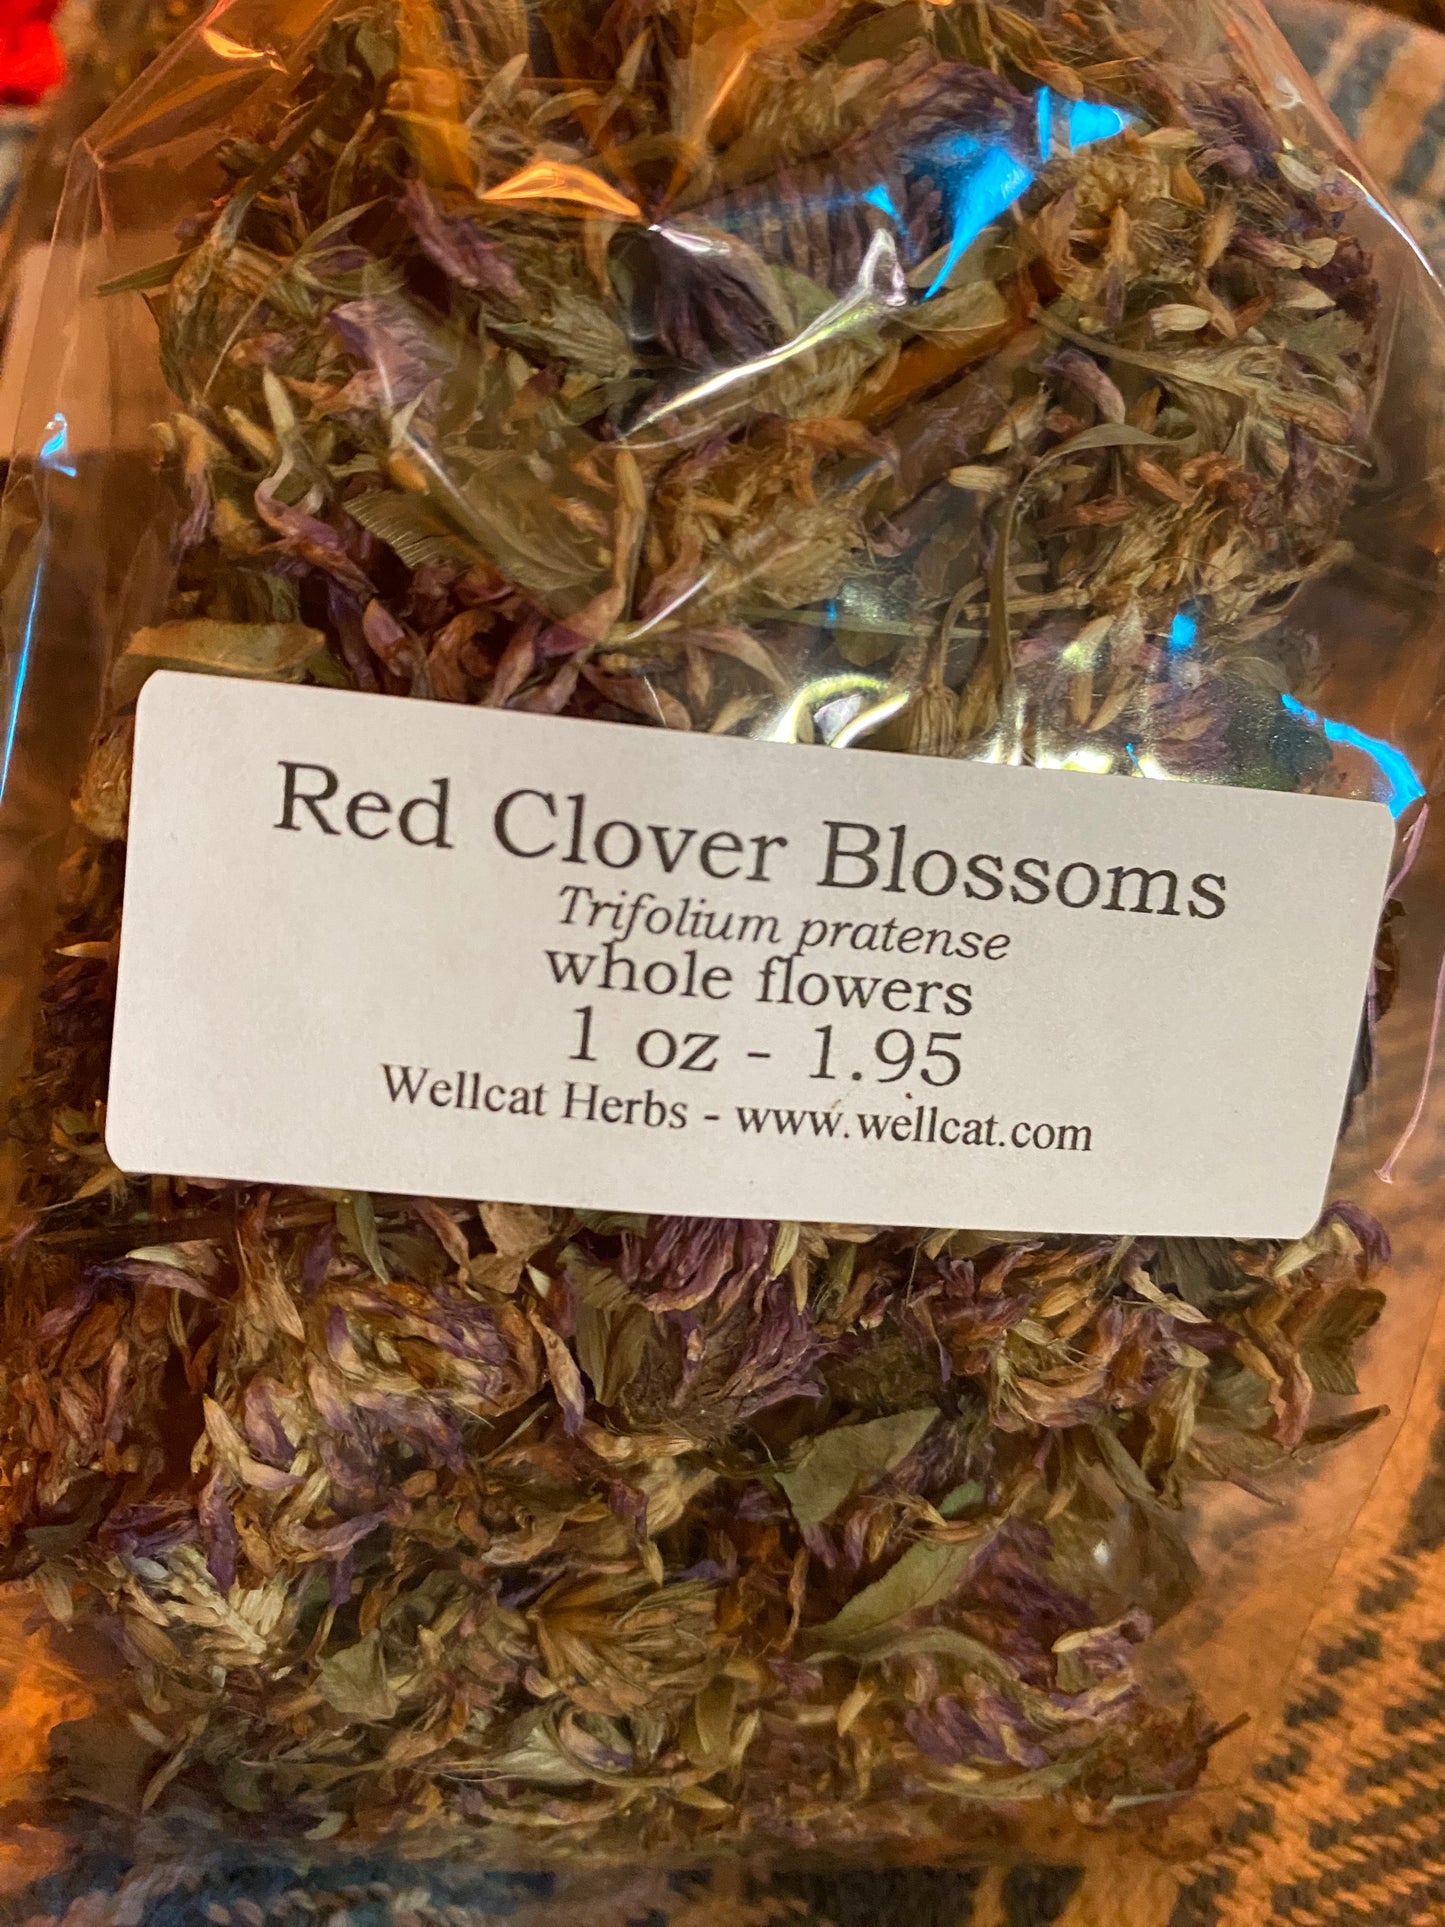 Red Clover Blossoms - Whole